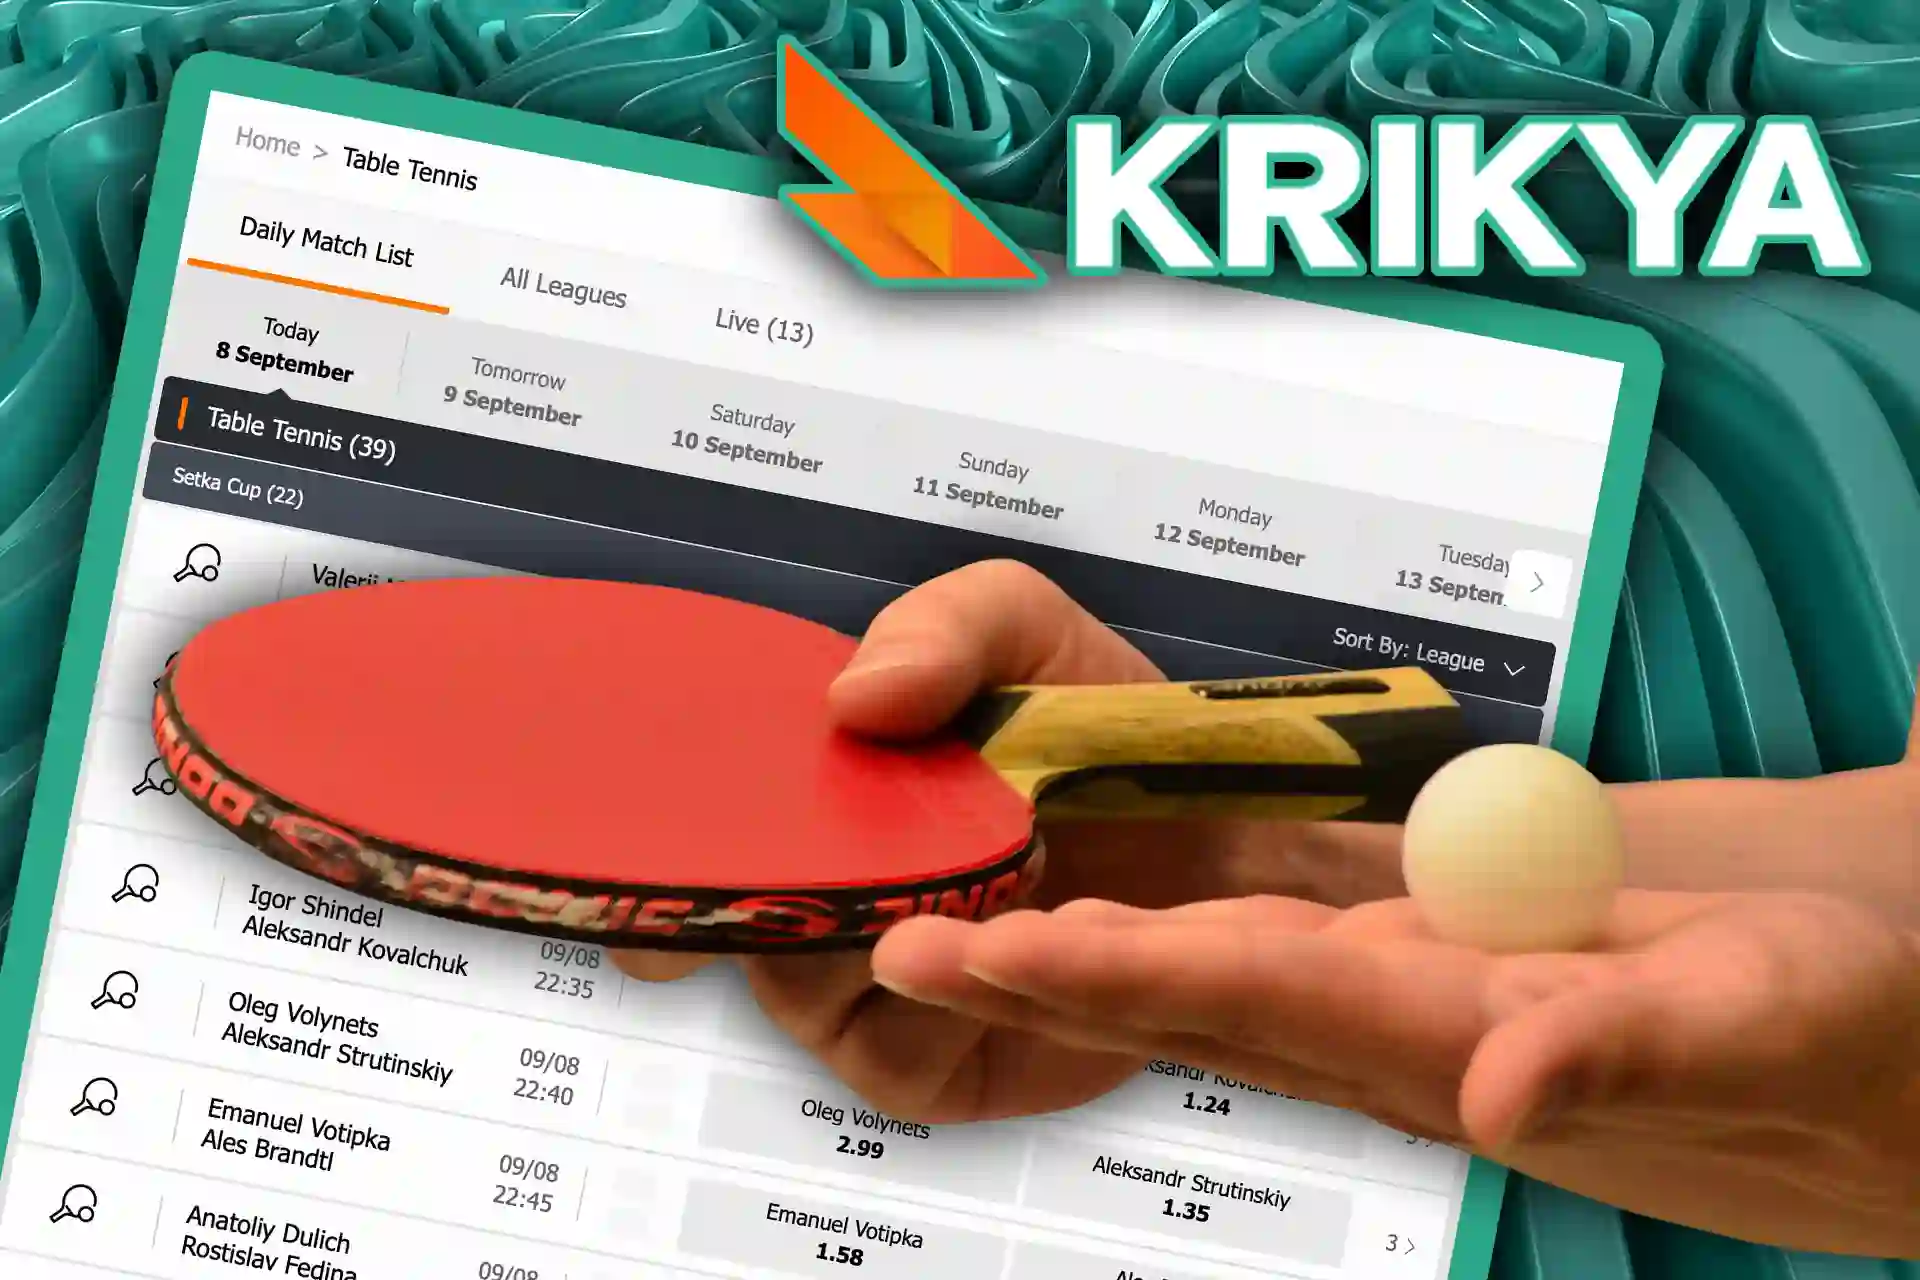 You can easily place bets on table tennis matches at Krikya.